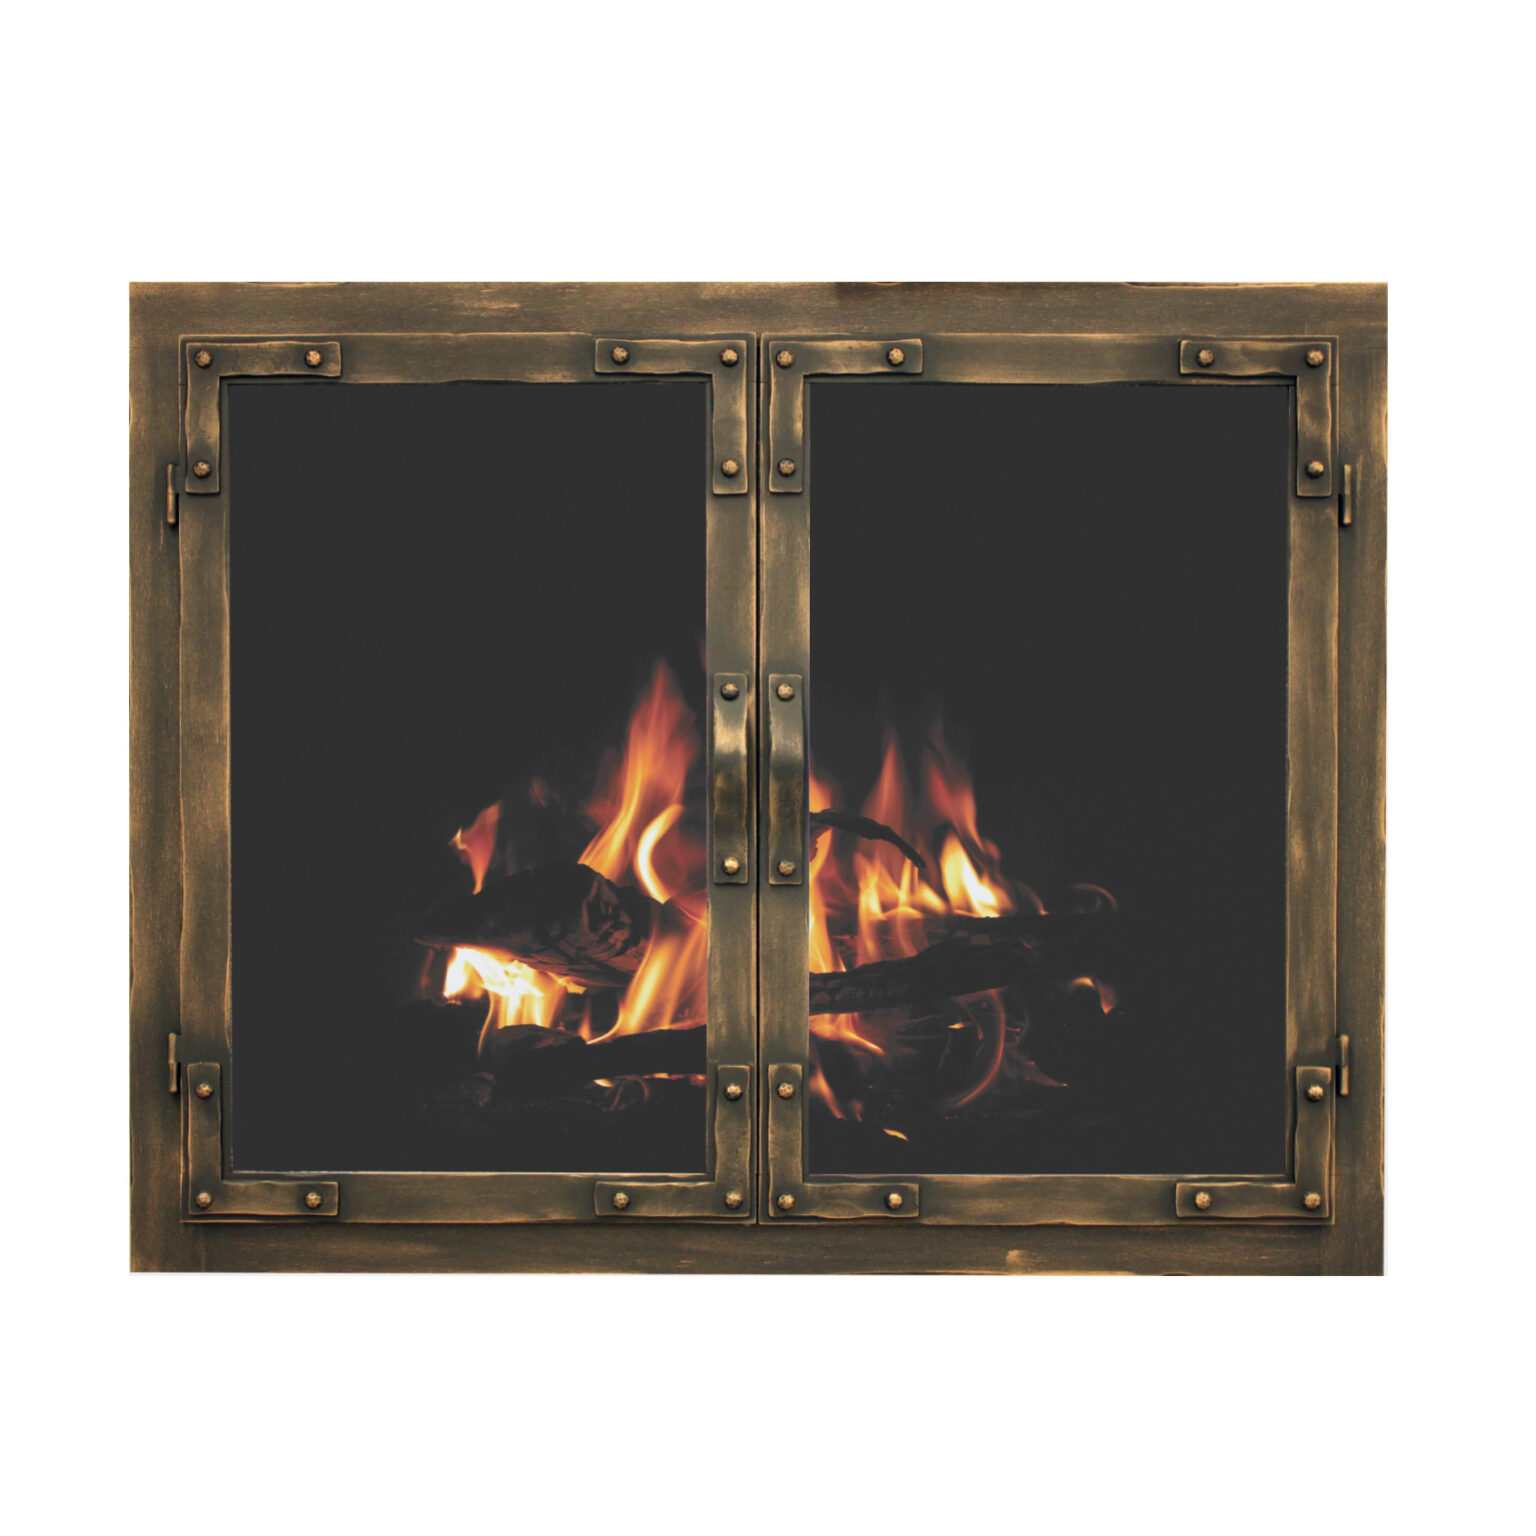 Stoll Craftsman Collection Old World Fireplace Doors.jpg